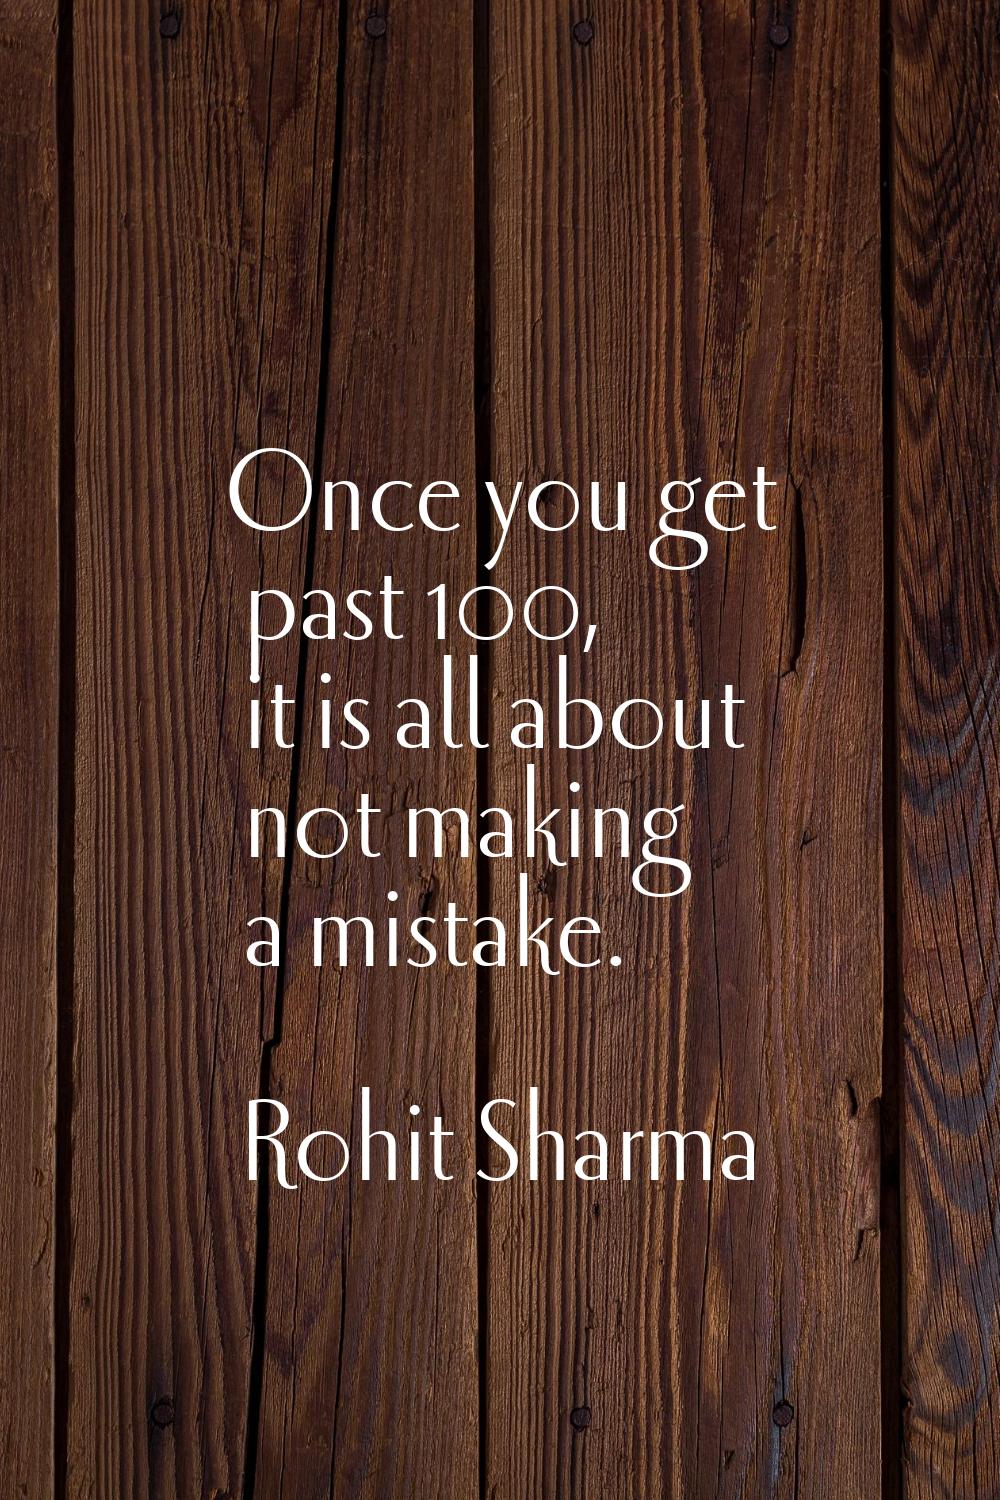 Once you get past 100, it is all about not making a mistake.